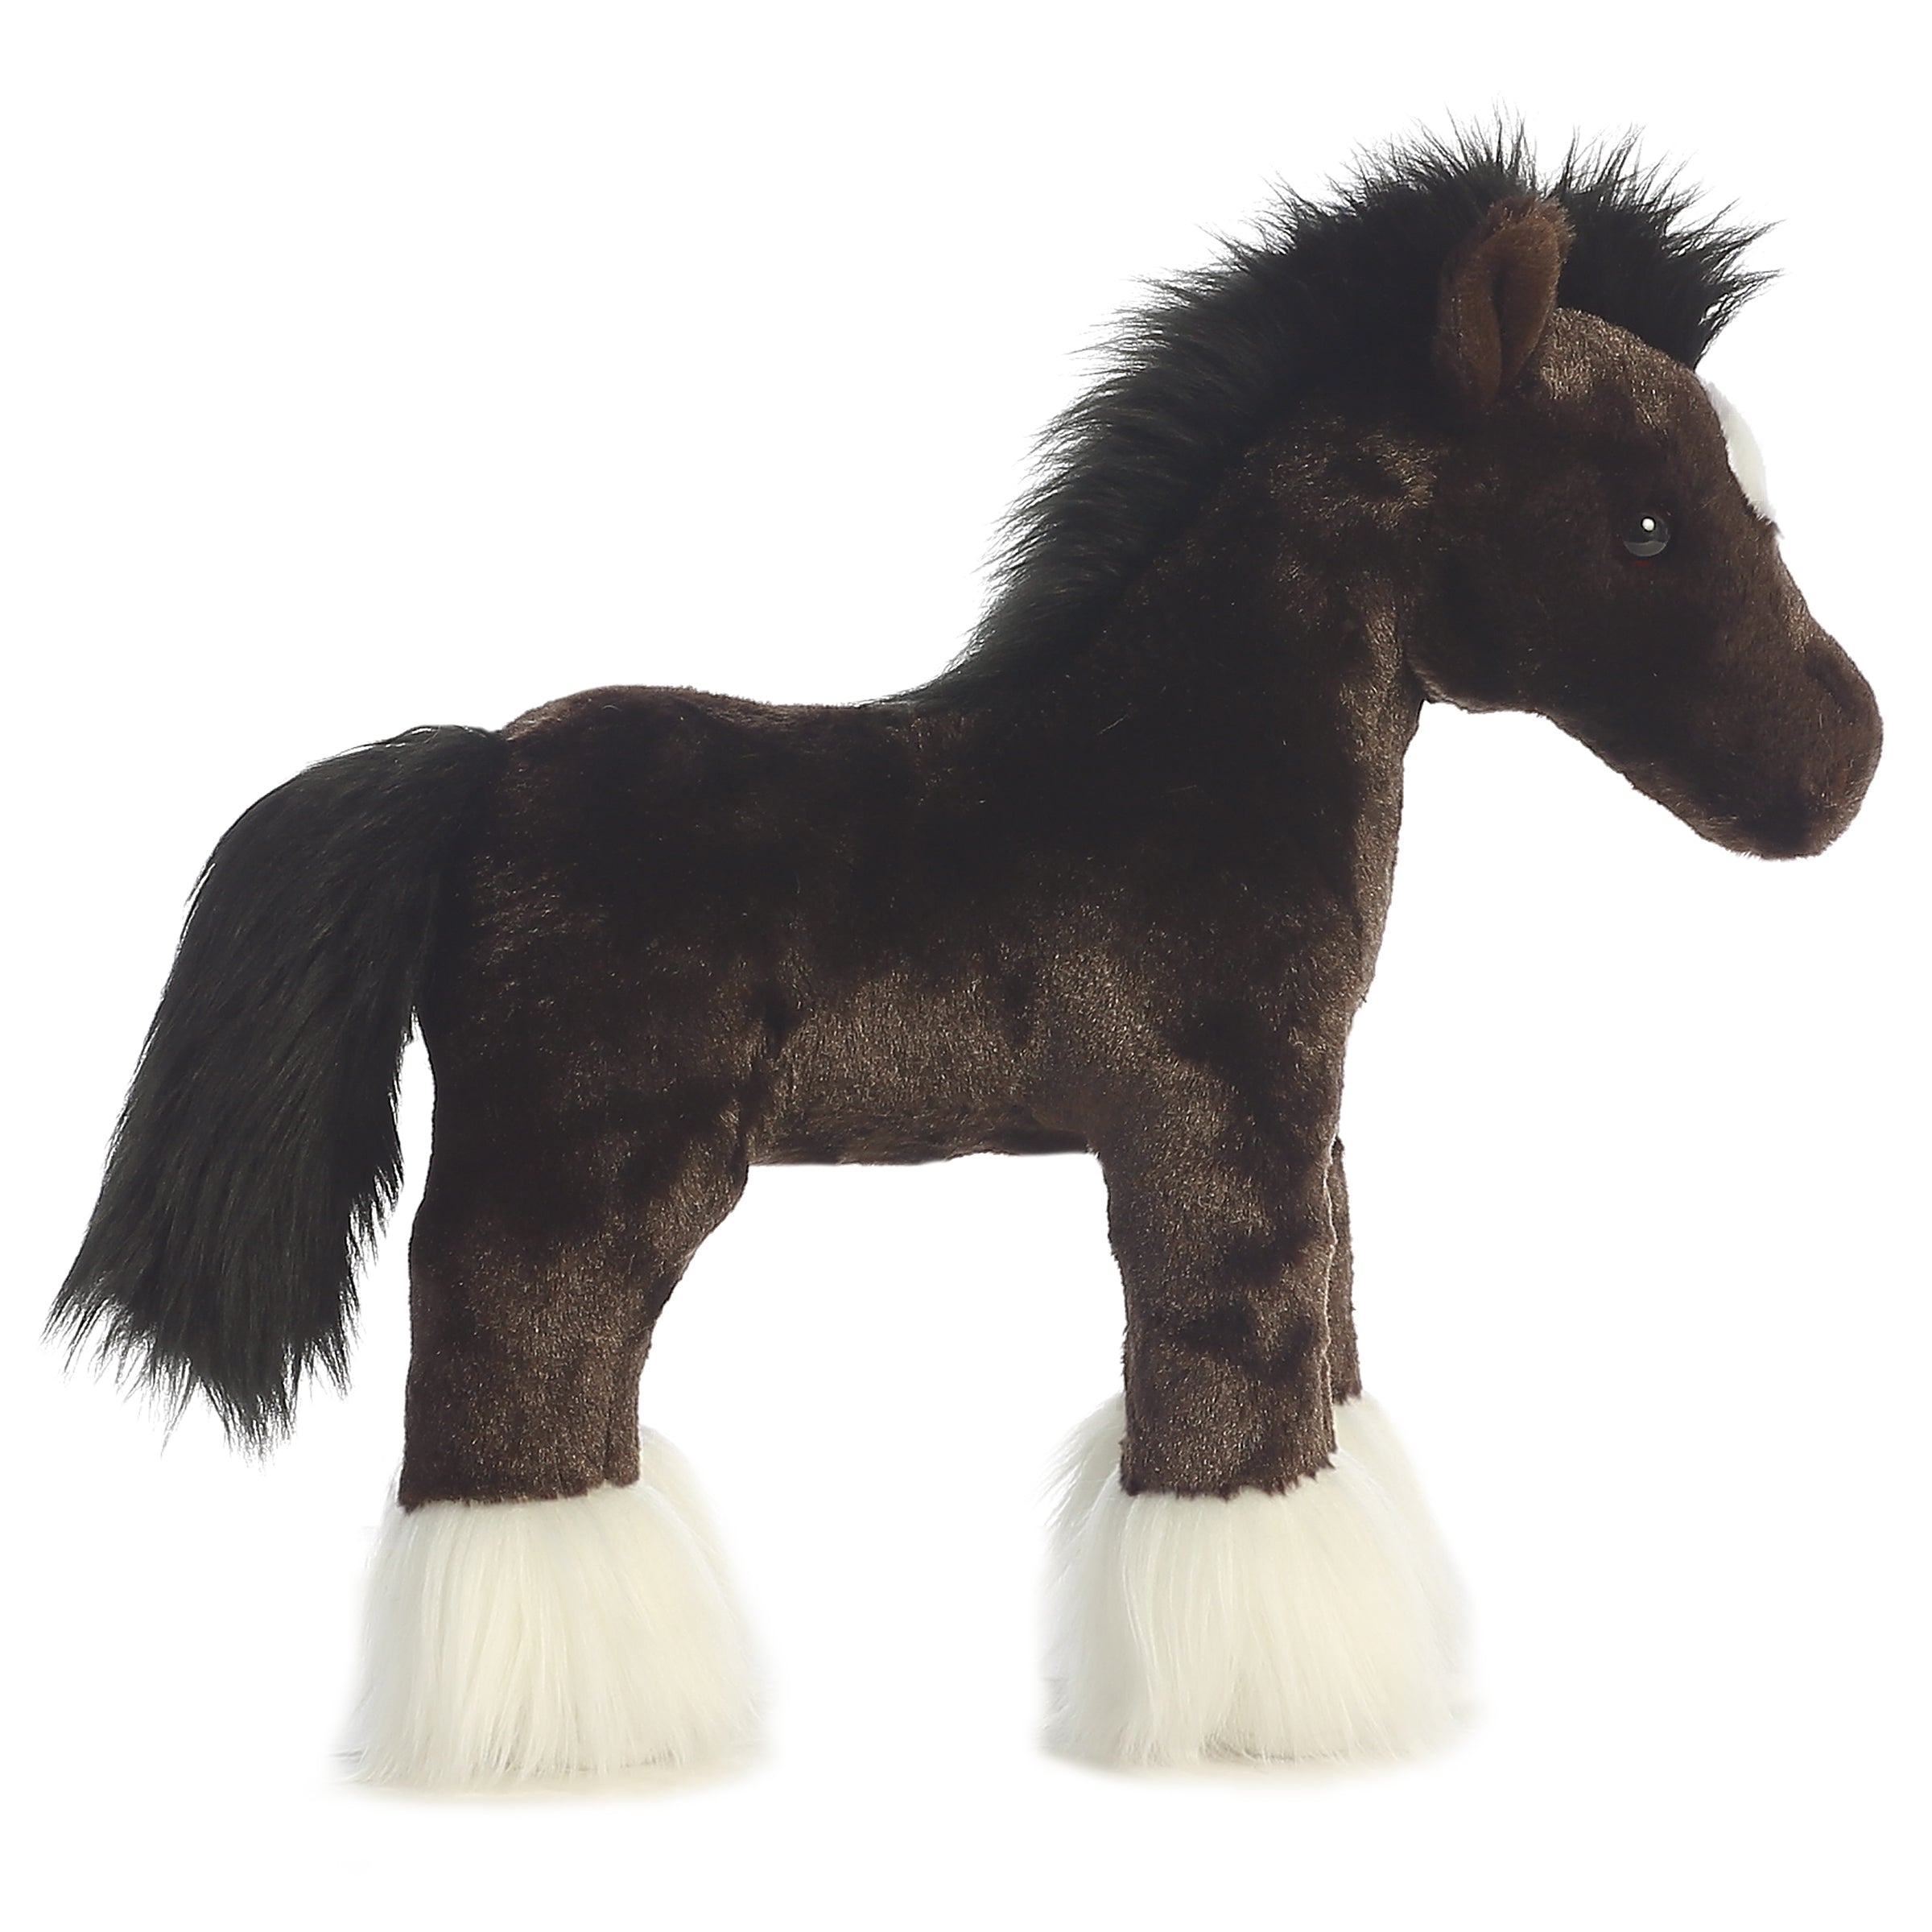 Aurora Stuffed Animal, 8 Mocha Horses - Chick Elms Grand Entry Western  Store and Rodeo Shop